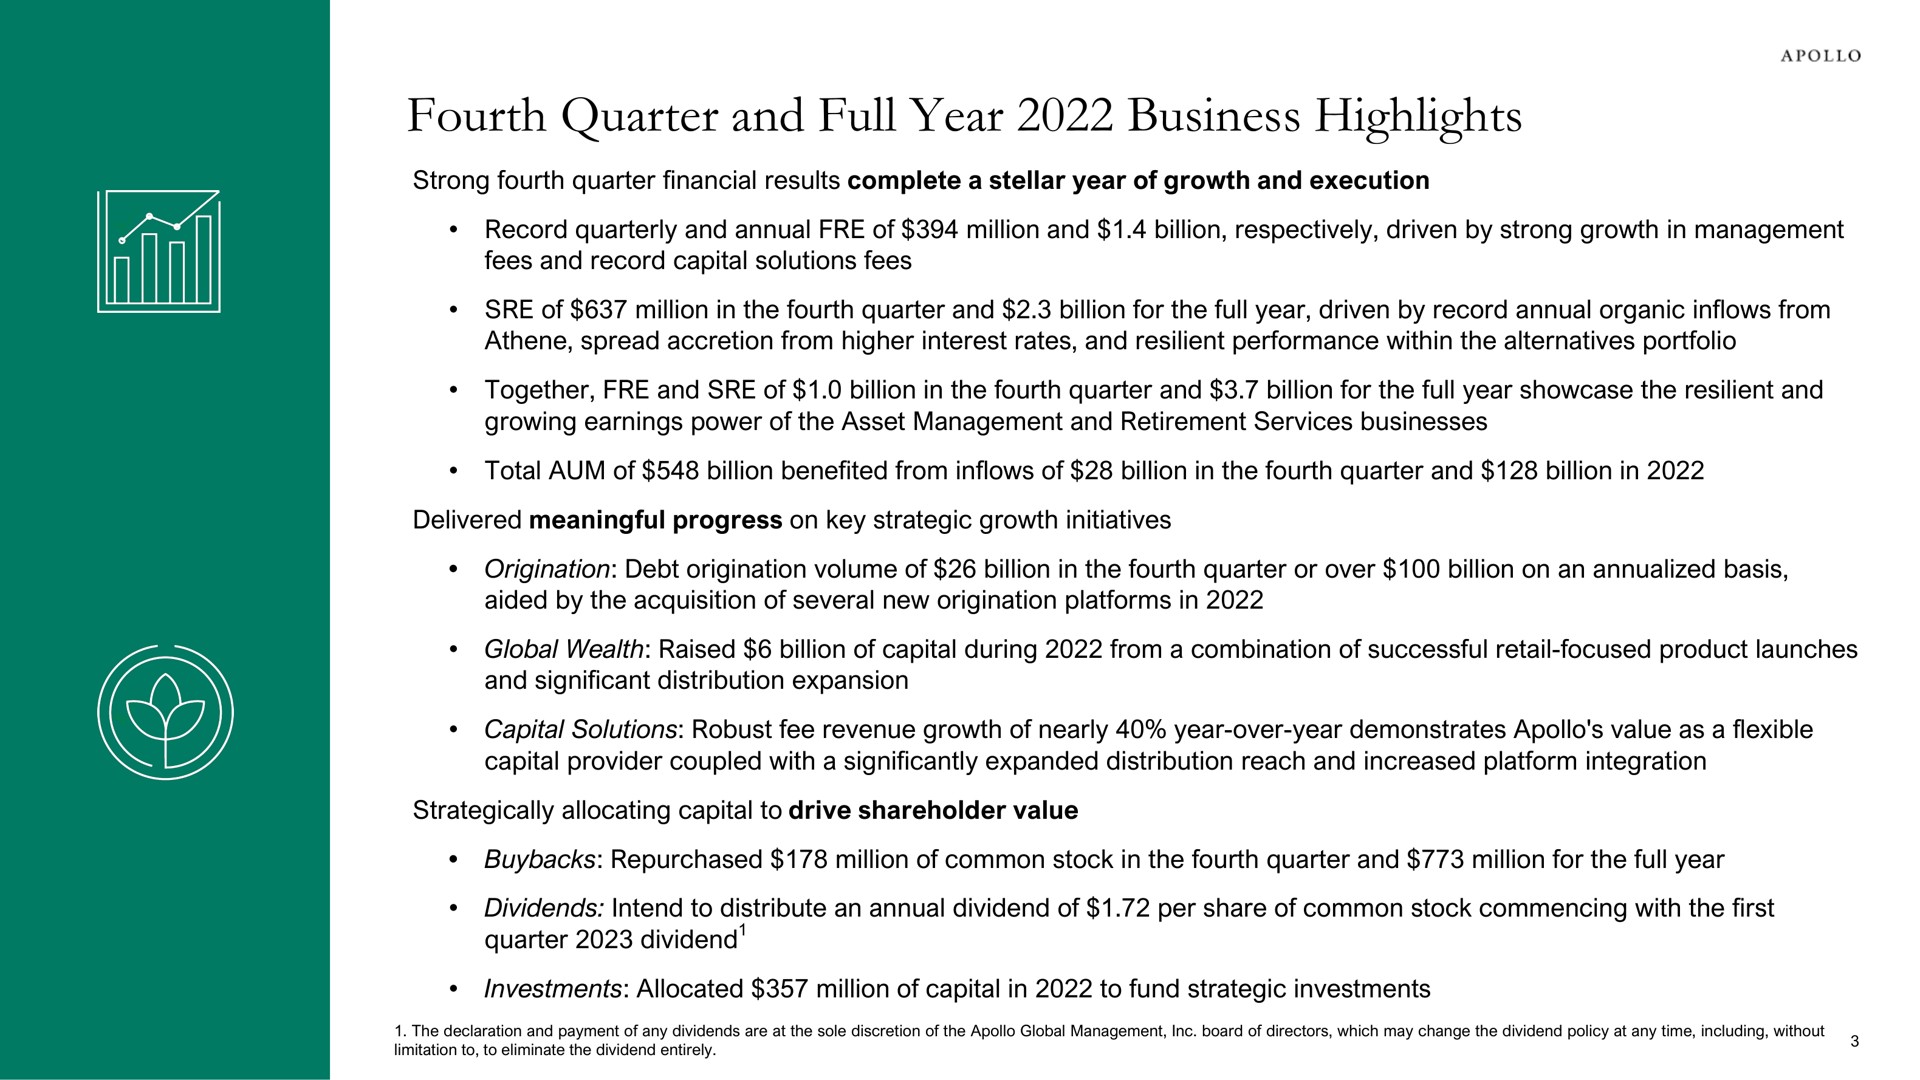 fourth quarter and full year business highlights dividend | Apollo Global Management